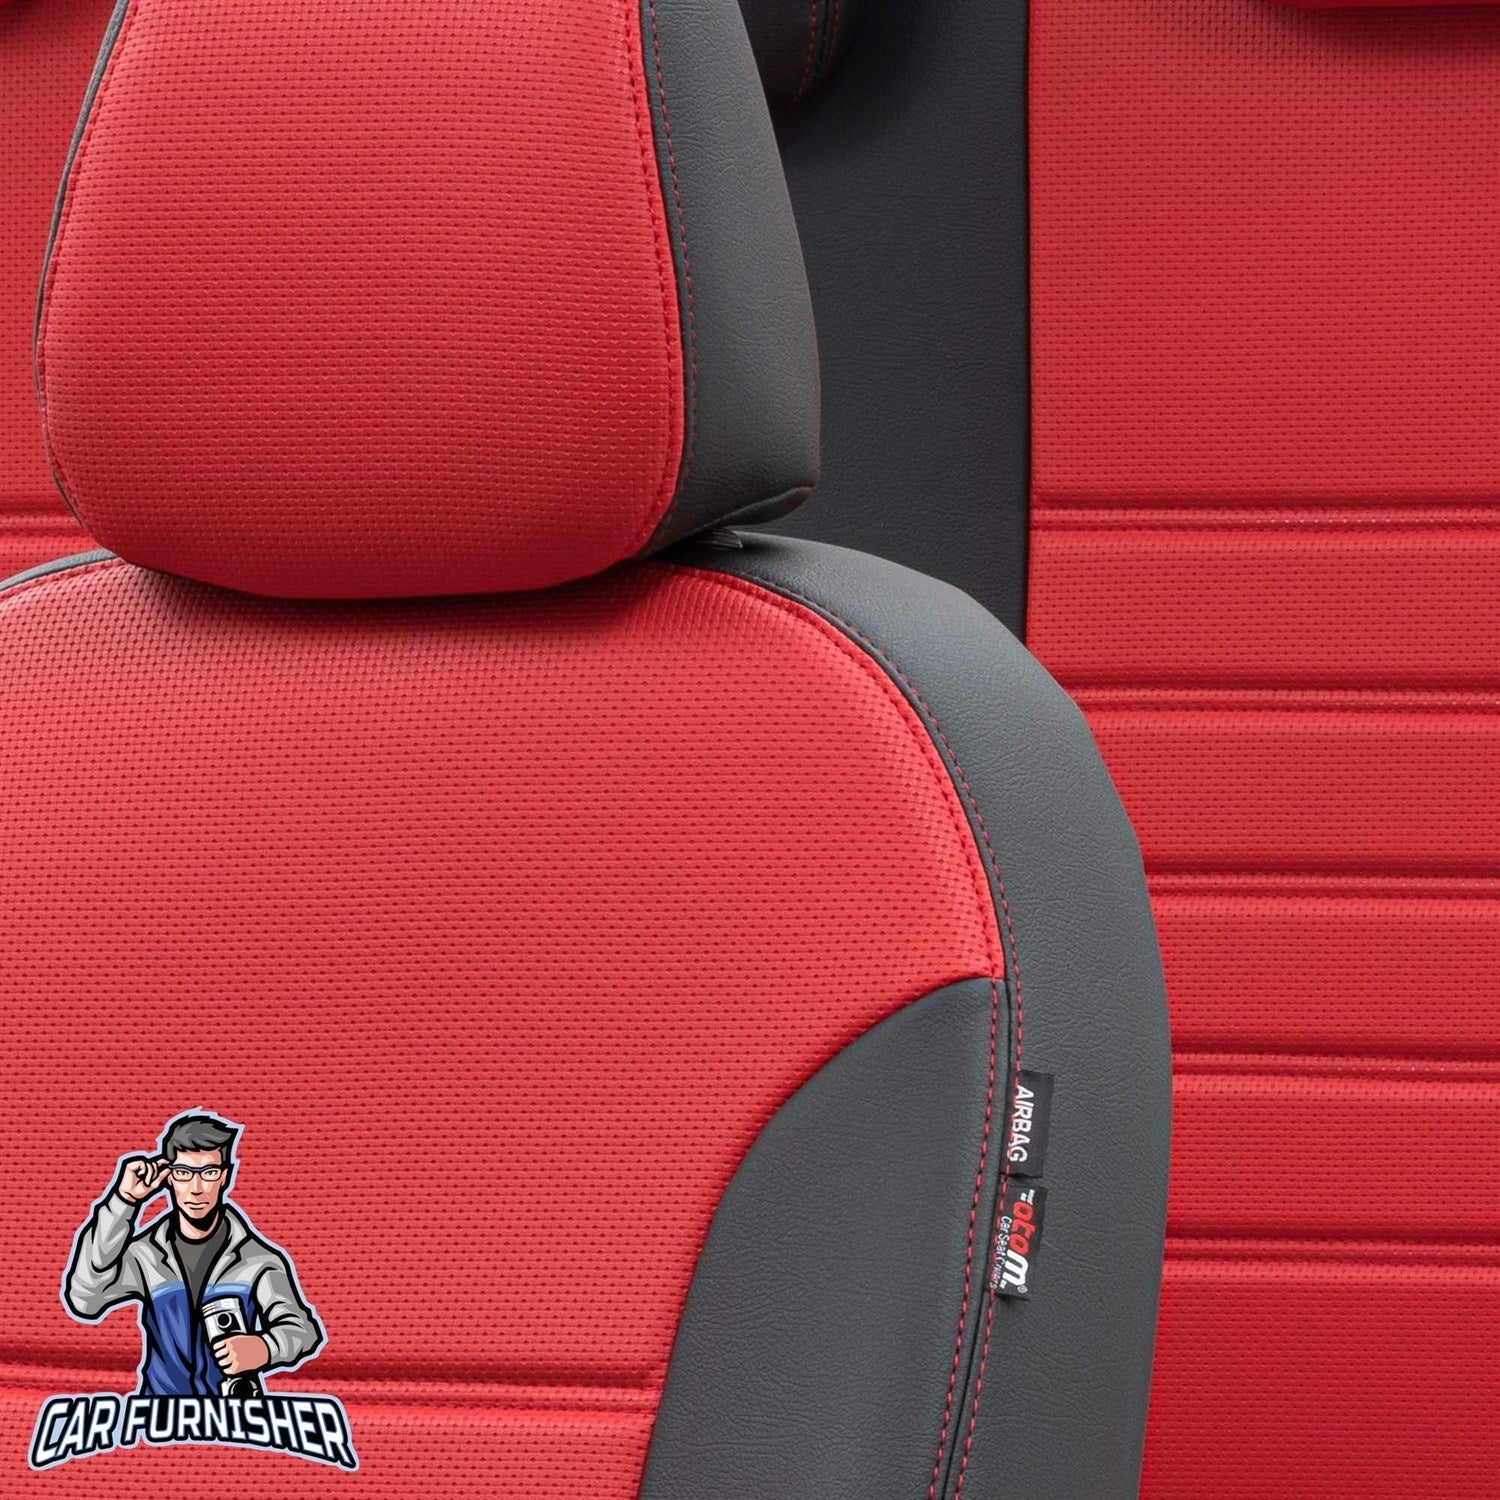 Hyundai Tucson Seat Covers New York Leather Design Red Leather